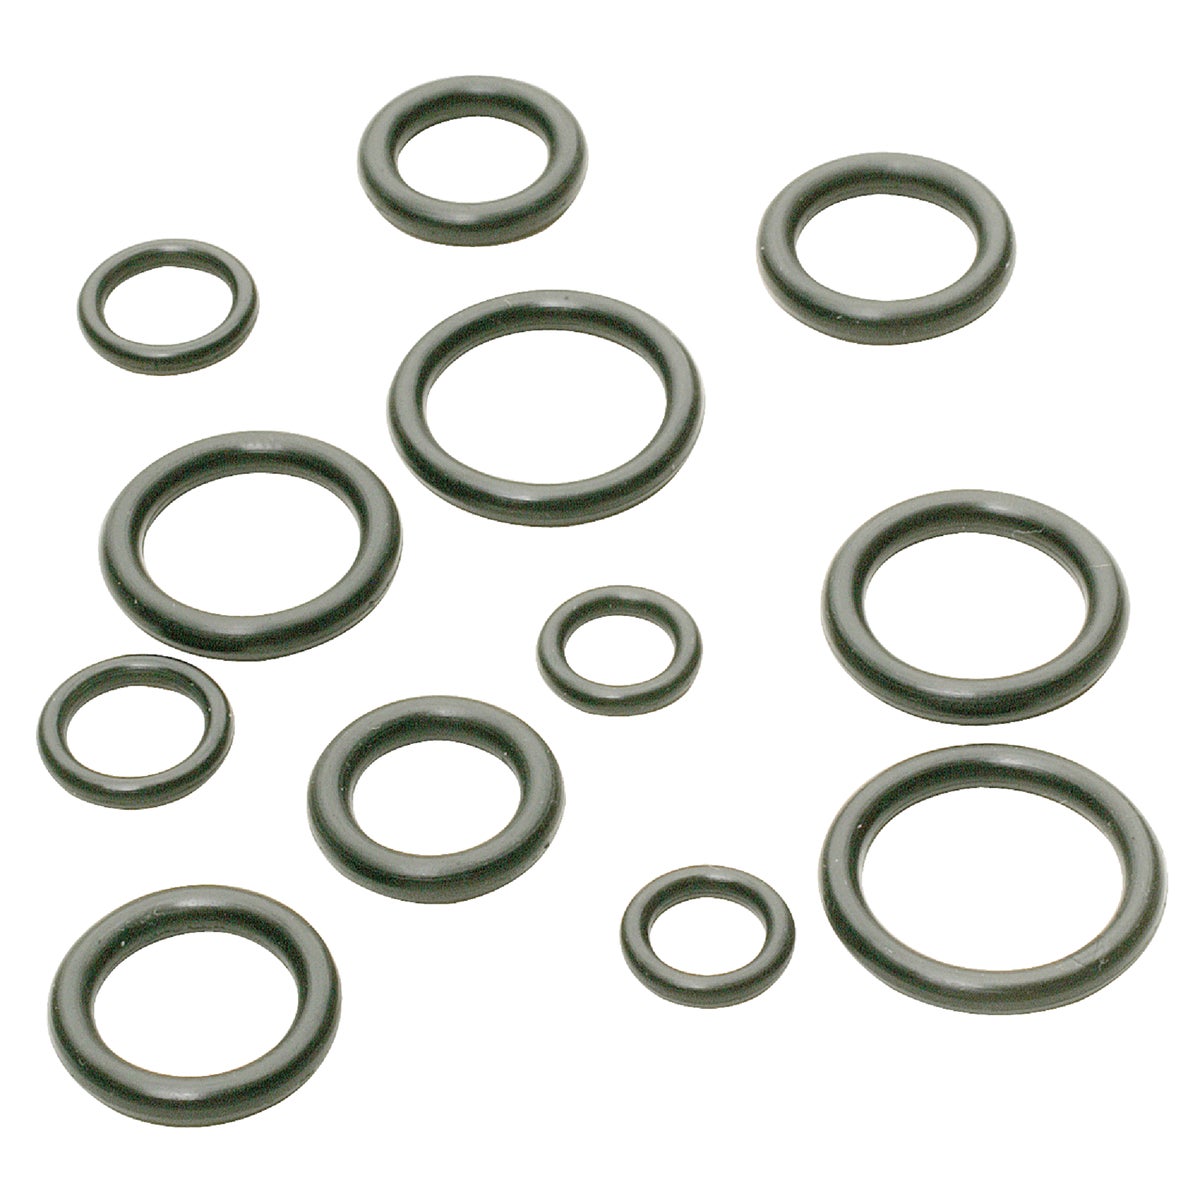 Do it Assorted Small O-Rings (12-Piece)